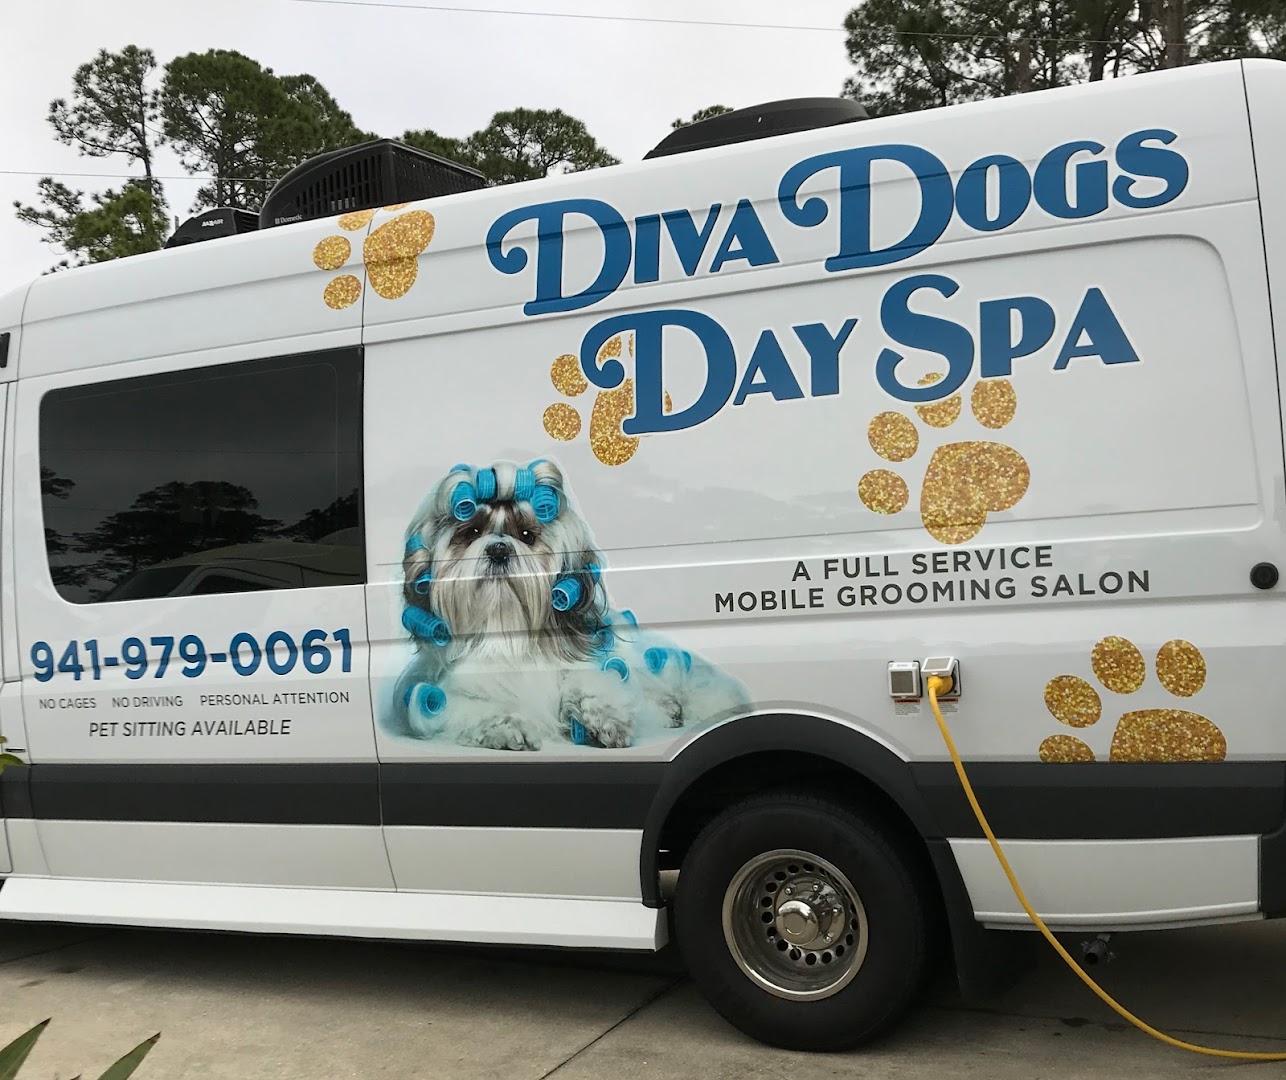 Diva Dogs Day Spa